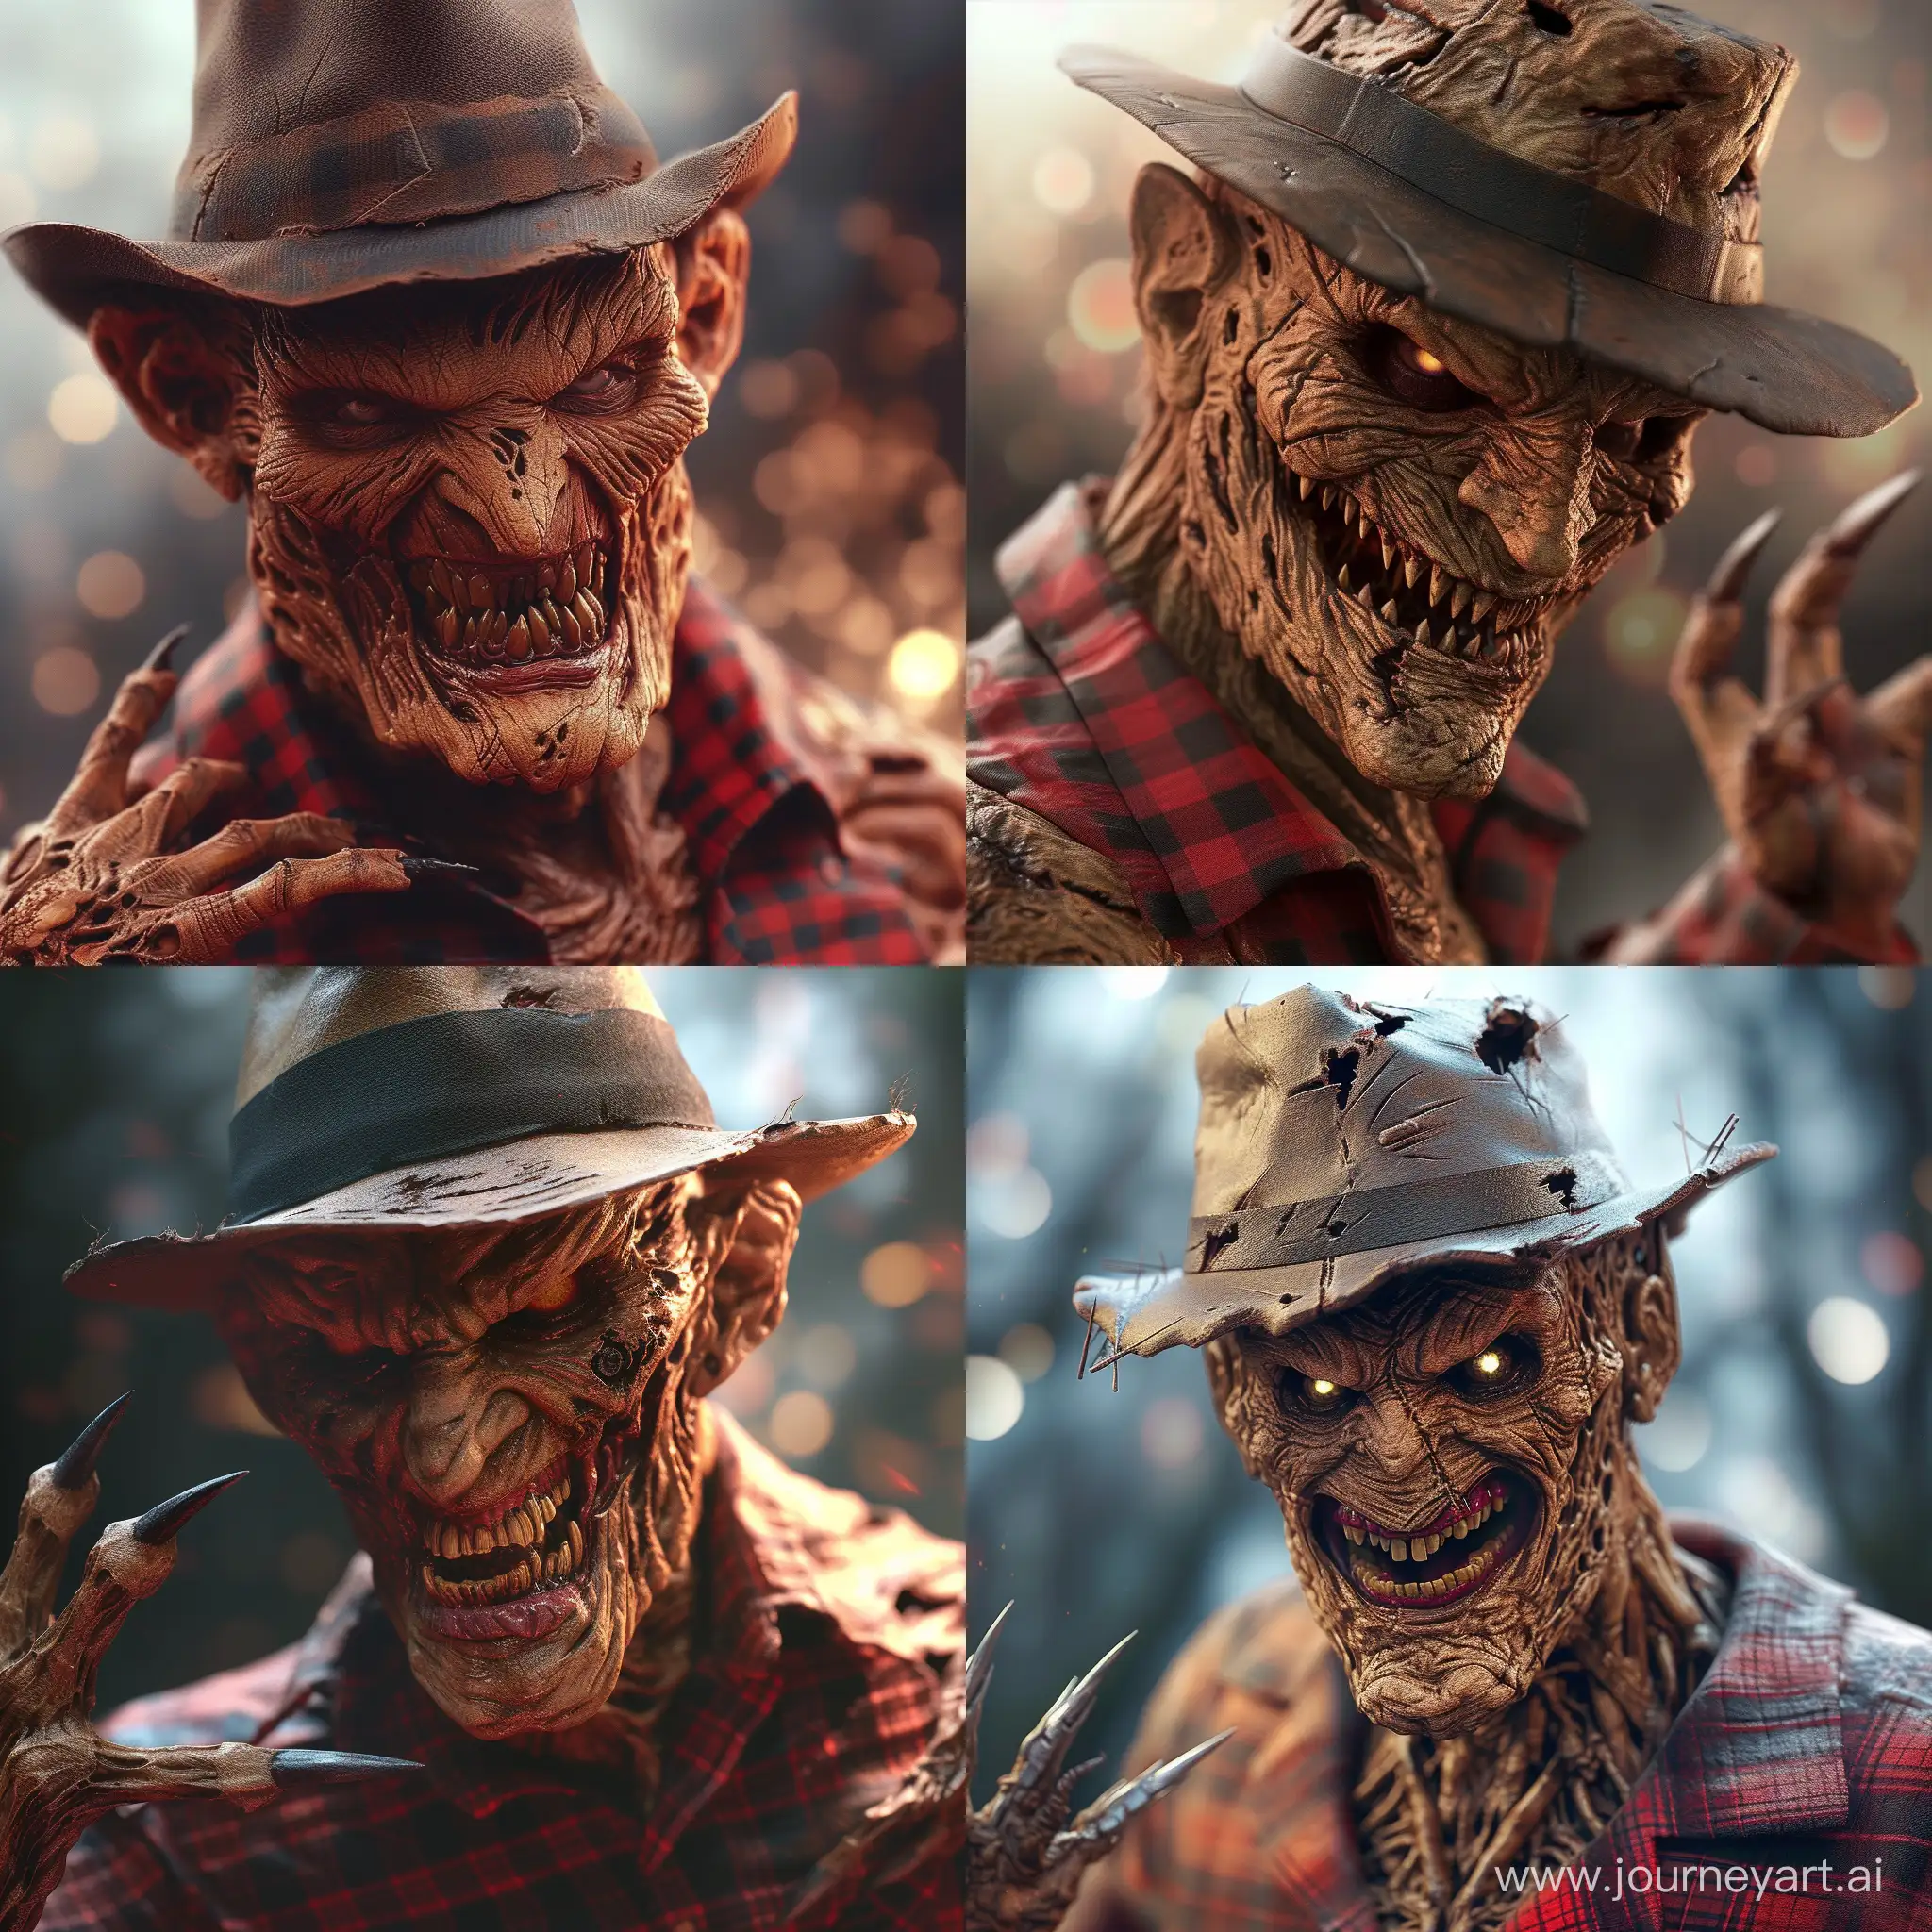 Gruesome-Freddy-Krueger-with-Menacing-Grin-and-Tattered-Hat